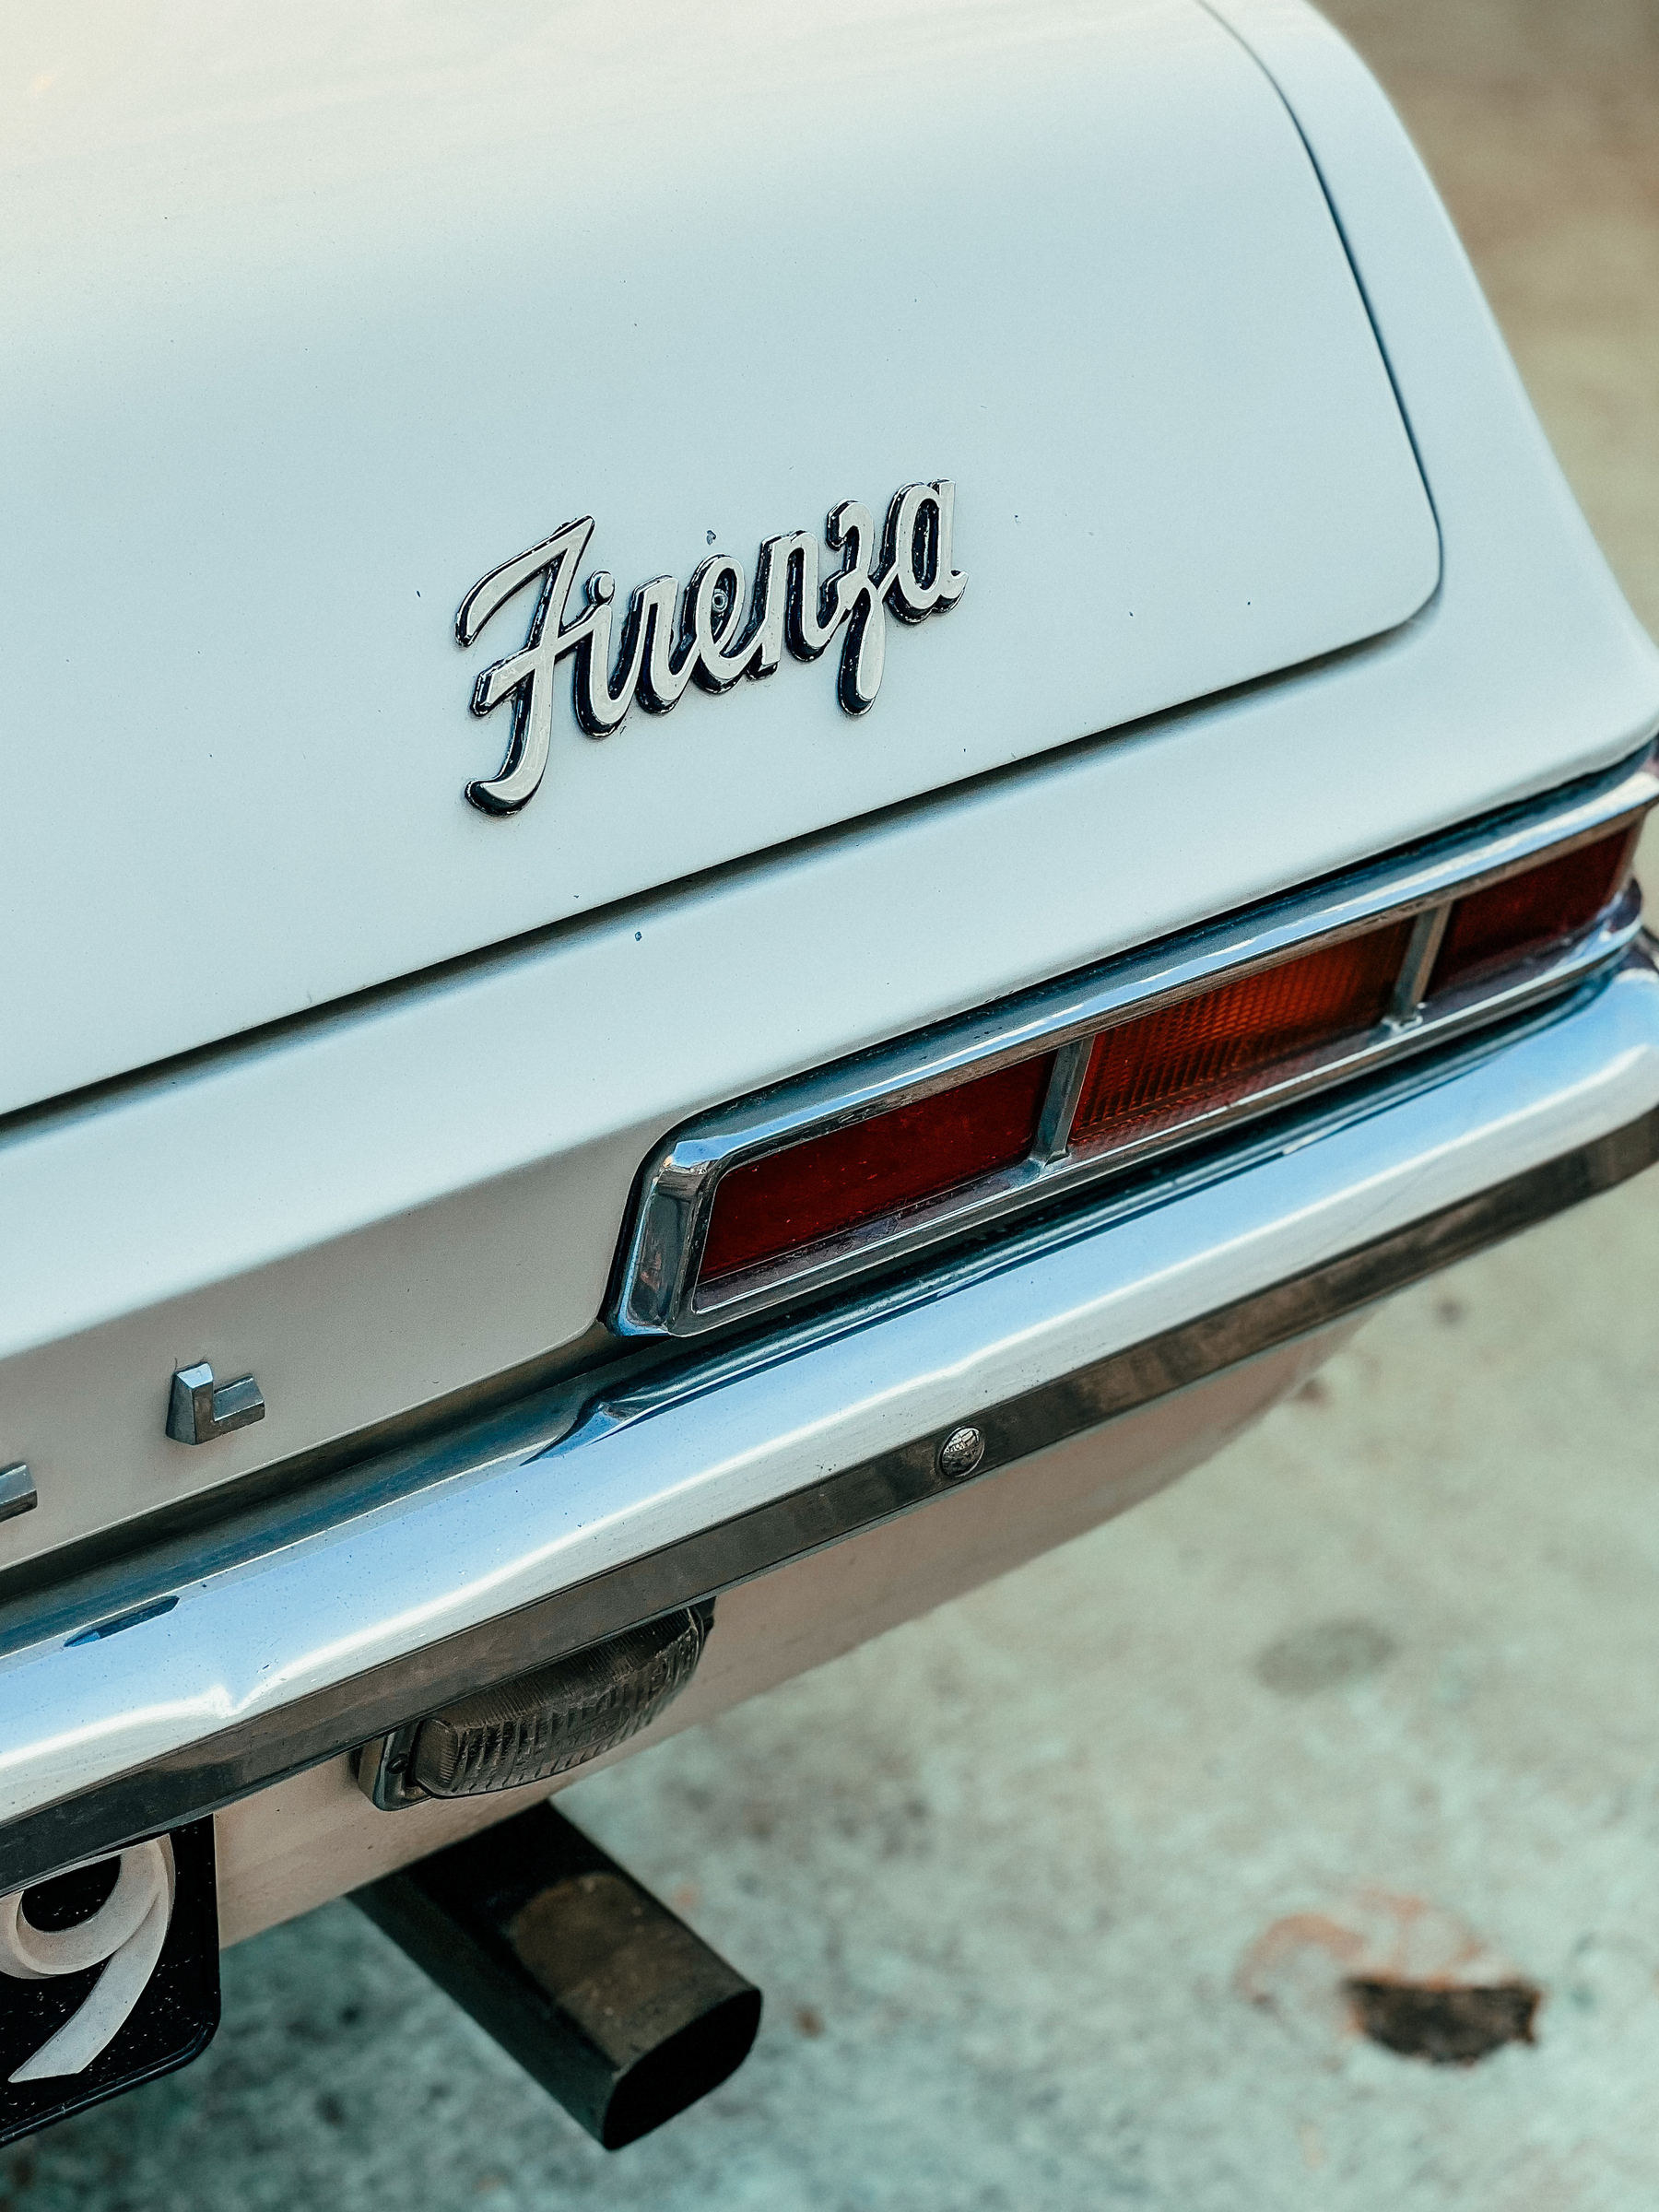 Detail of the back of a car, the word “Firenza” is visible.